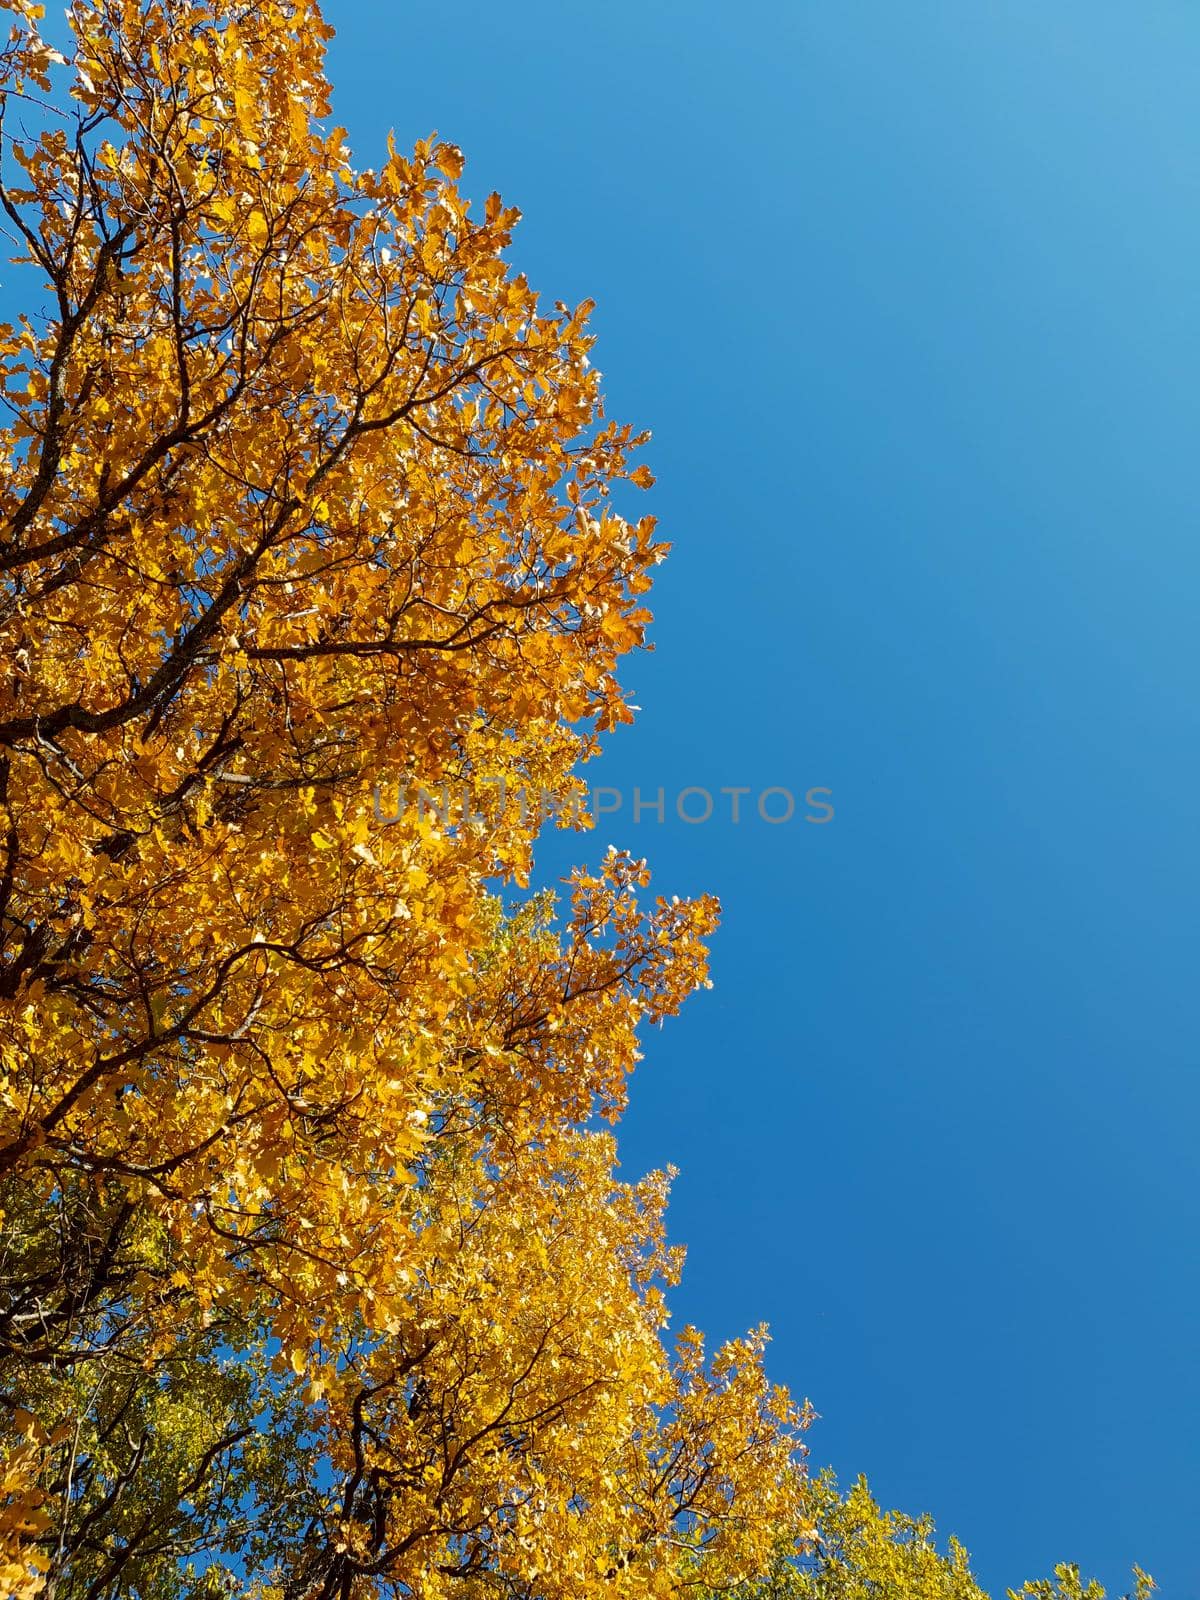 Yellow tree leaves against a clear blue sky by Spirina